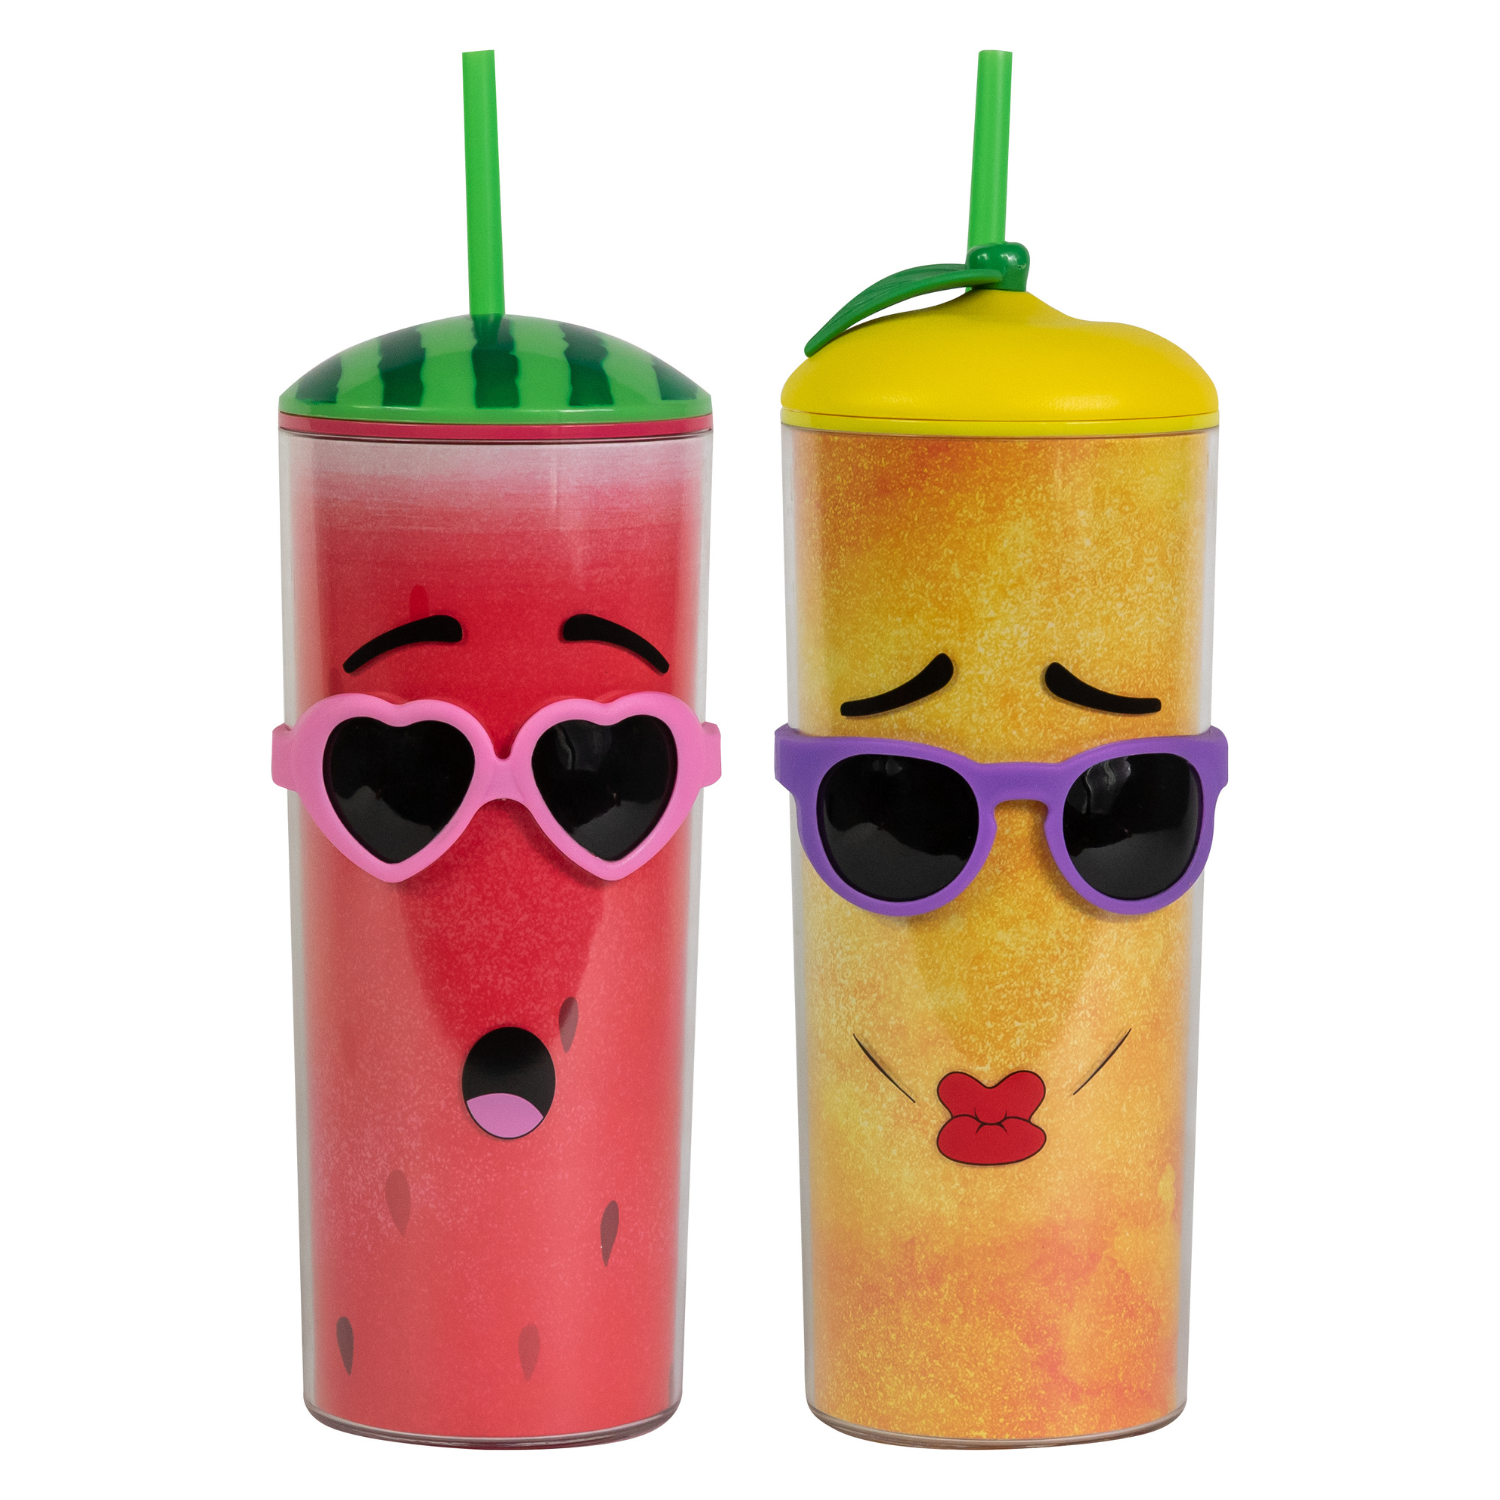 Cool Gear Shady Fruit Tumbler with Pressure Fit Lid and Straw Included, 20 Ounce - image 1 of 3